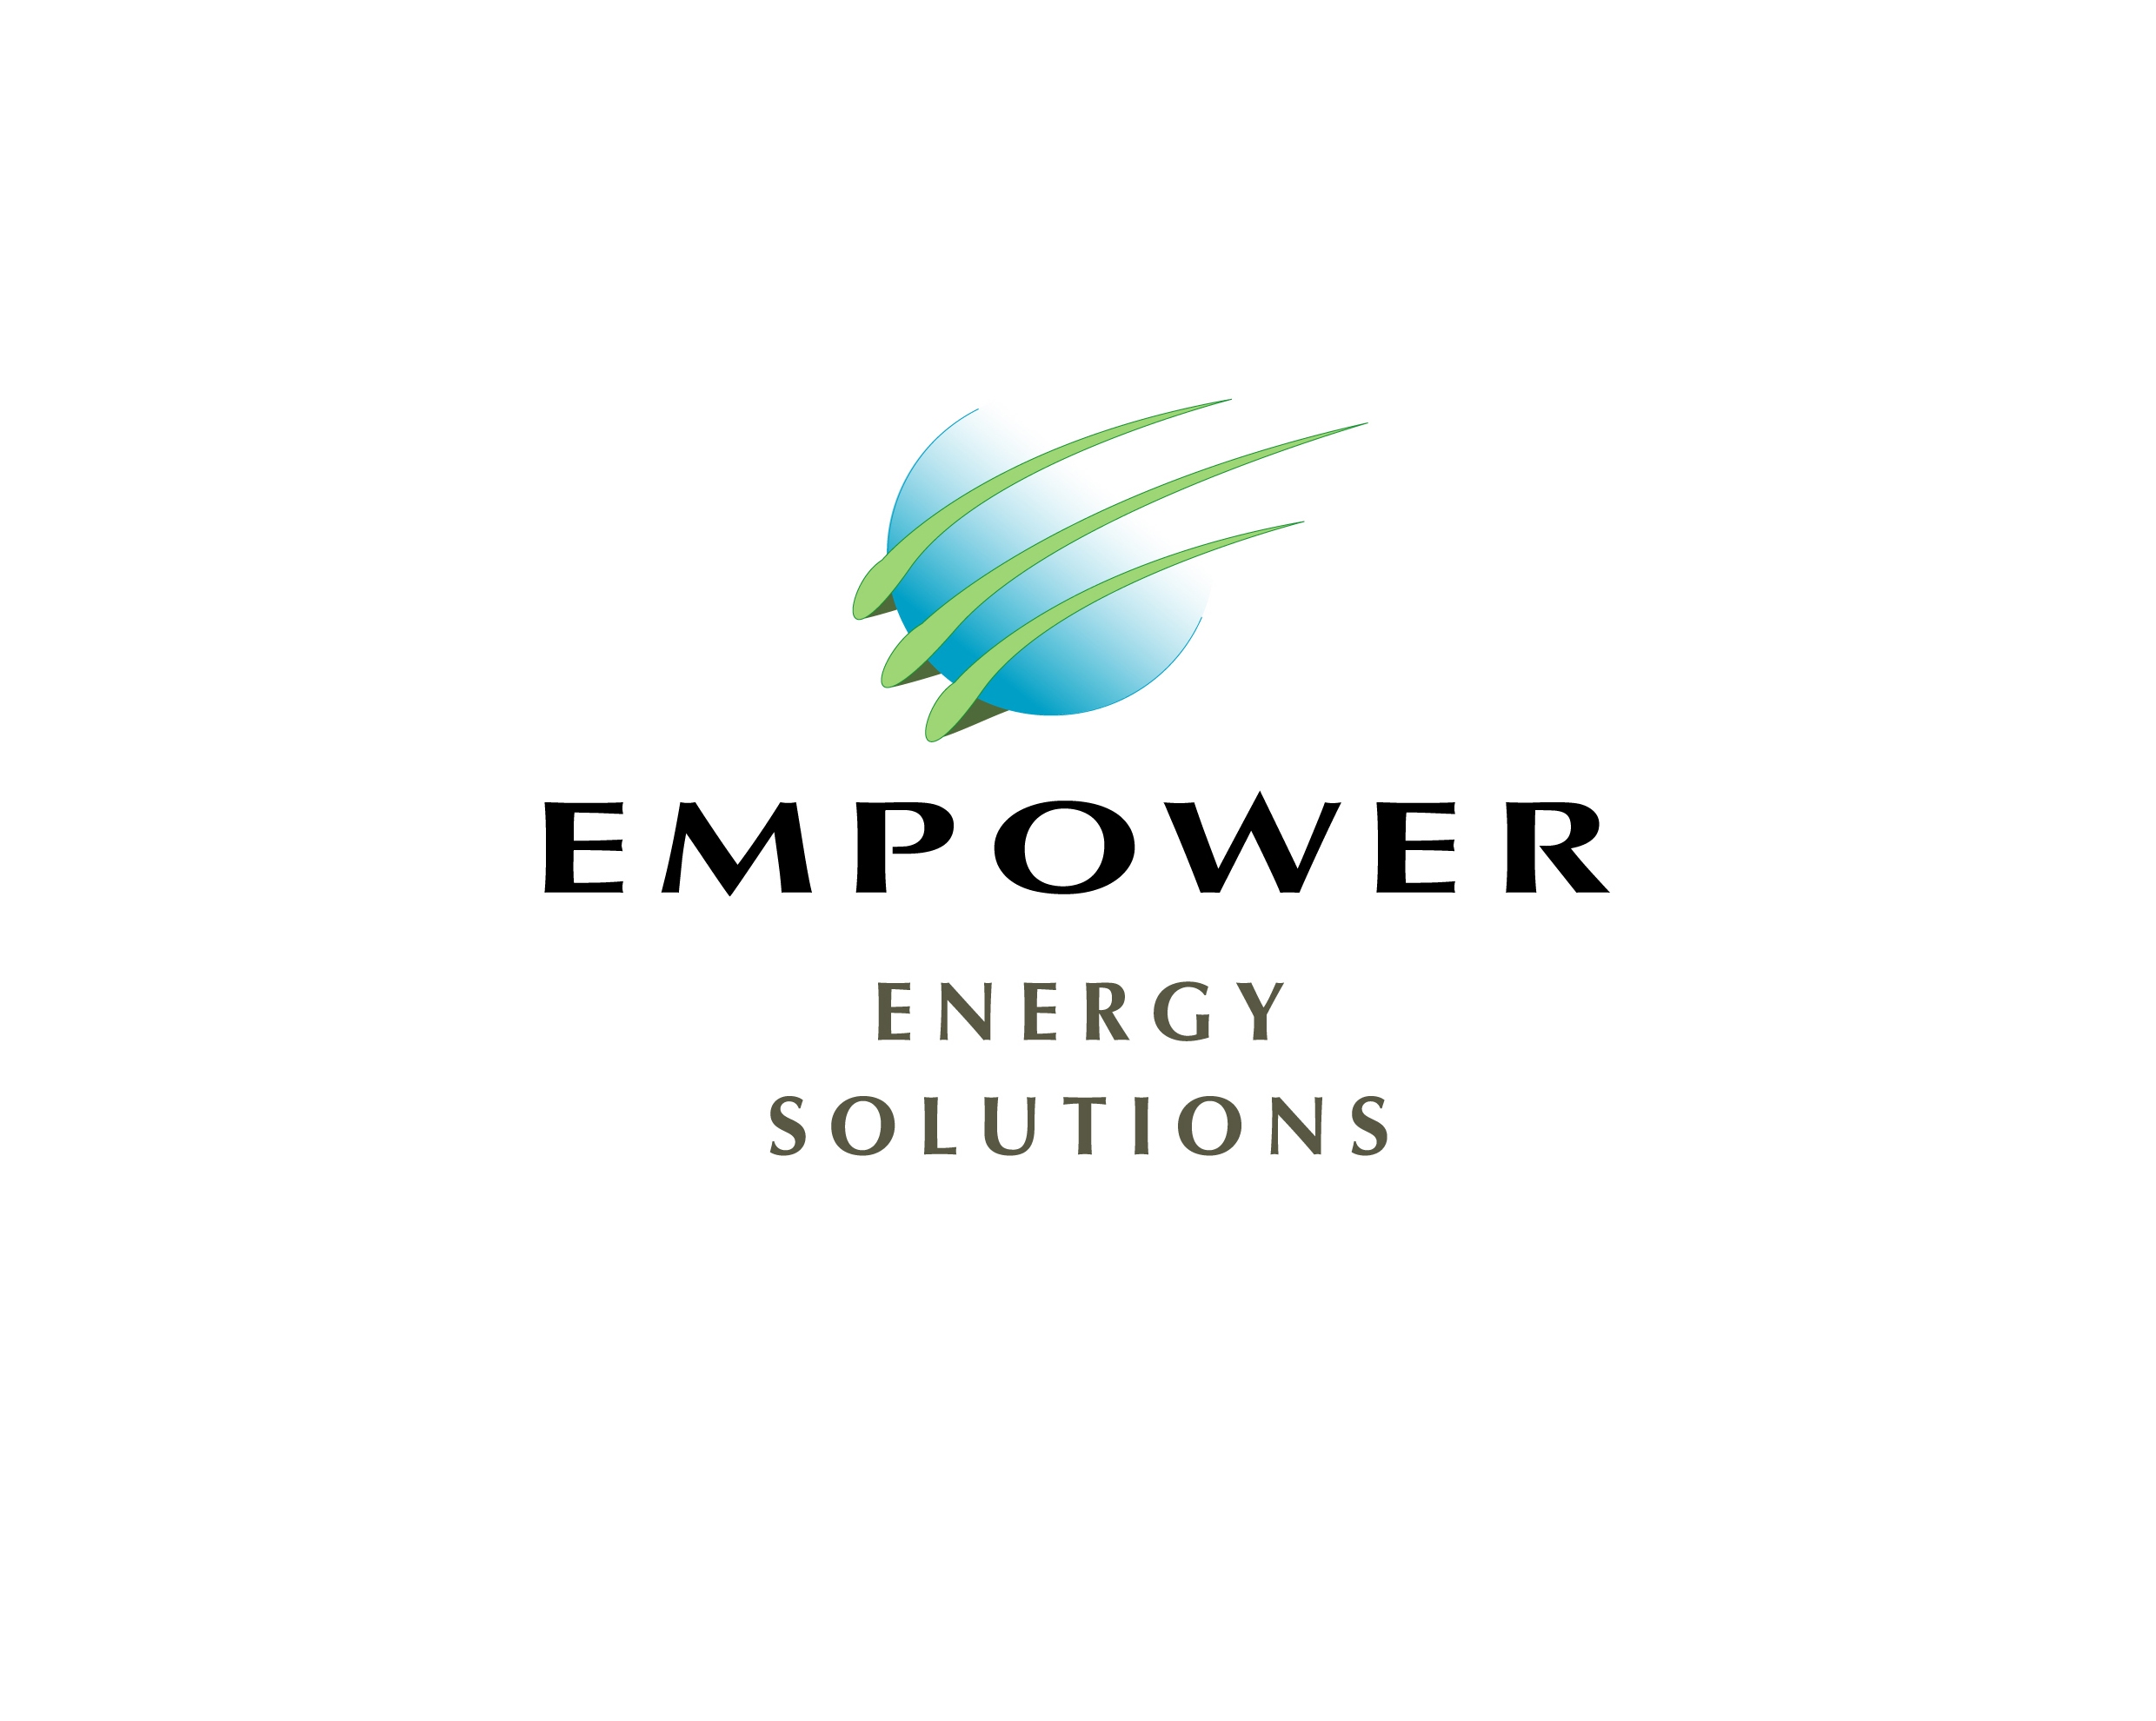 Empower records the highest-ever revenue, reaching AED 3.035 billion